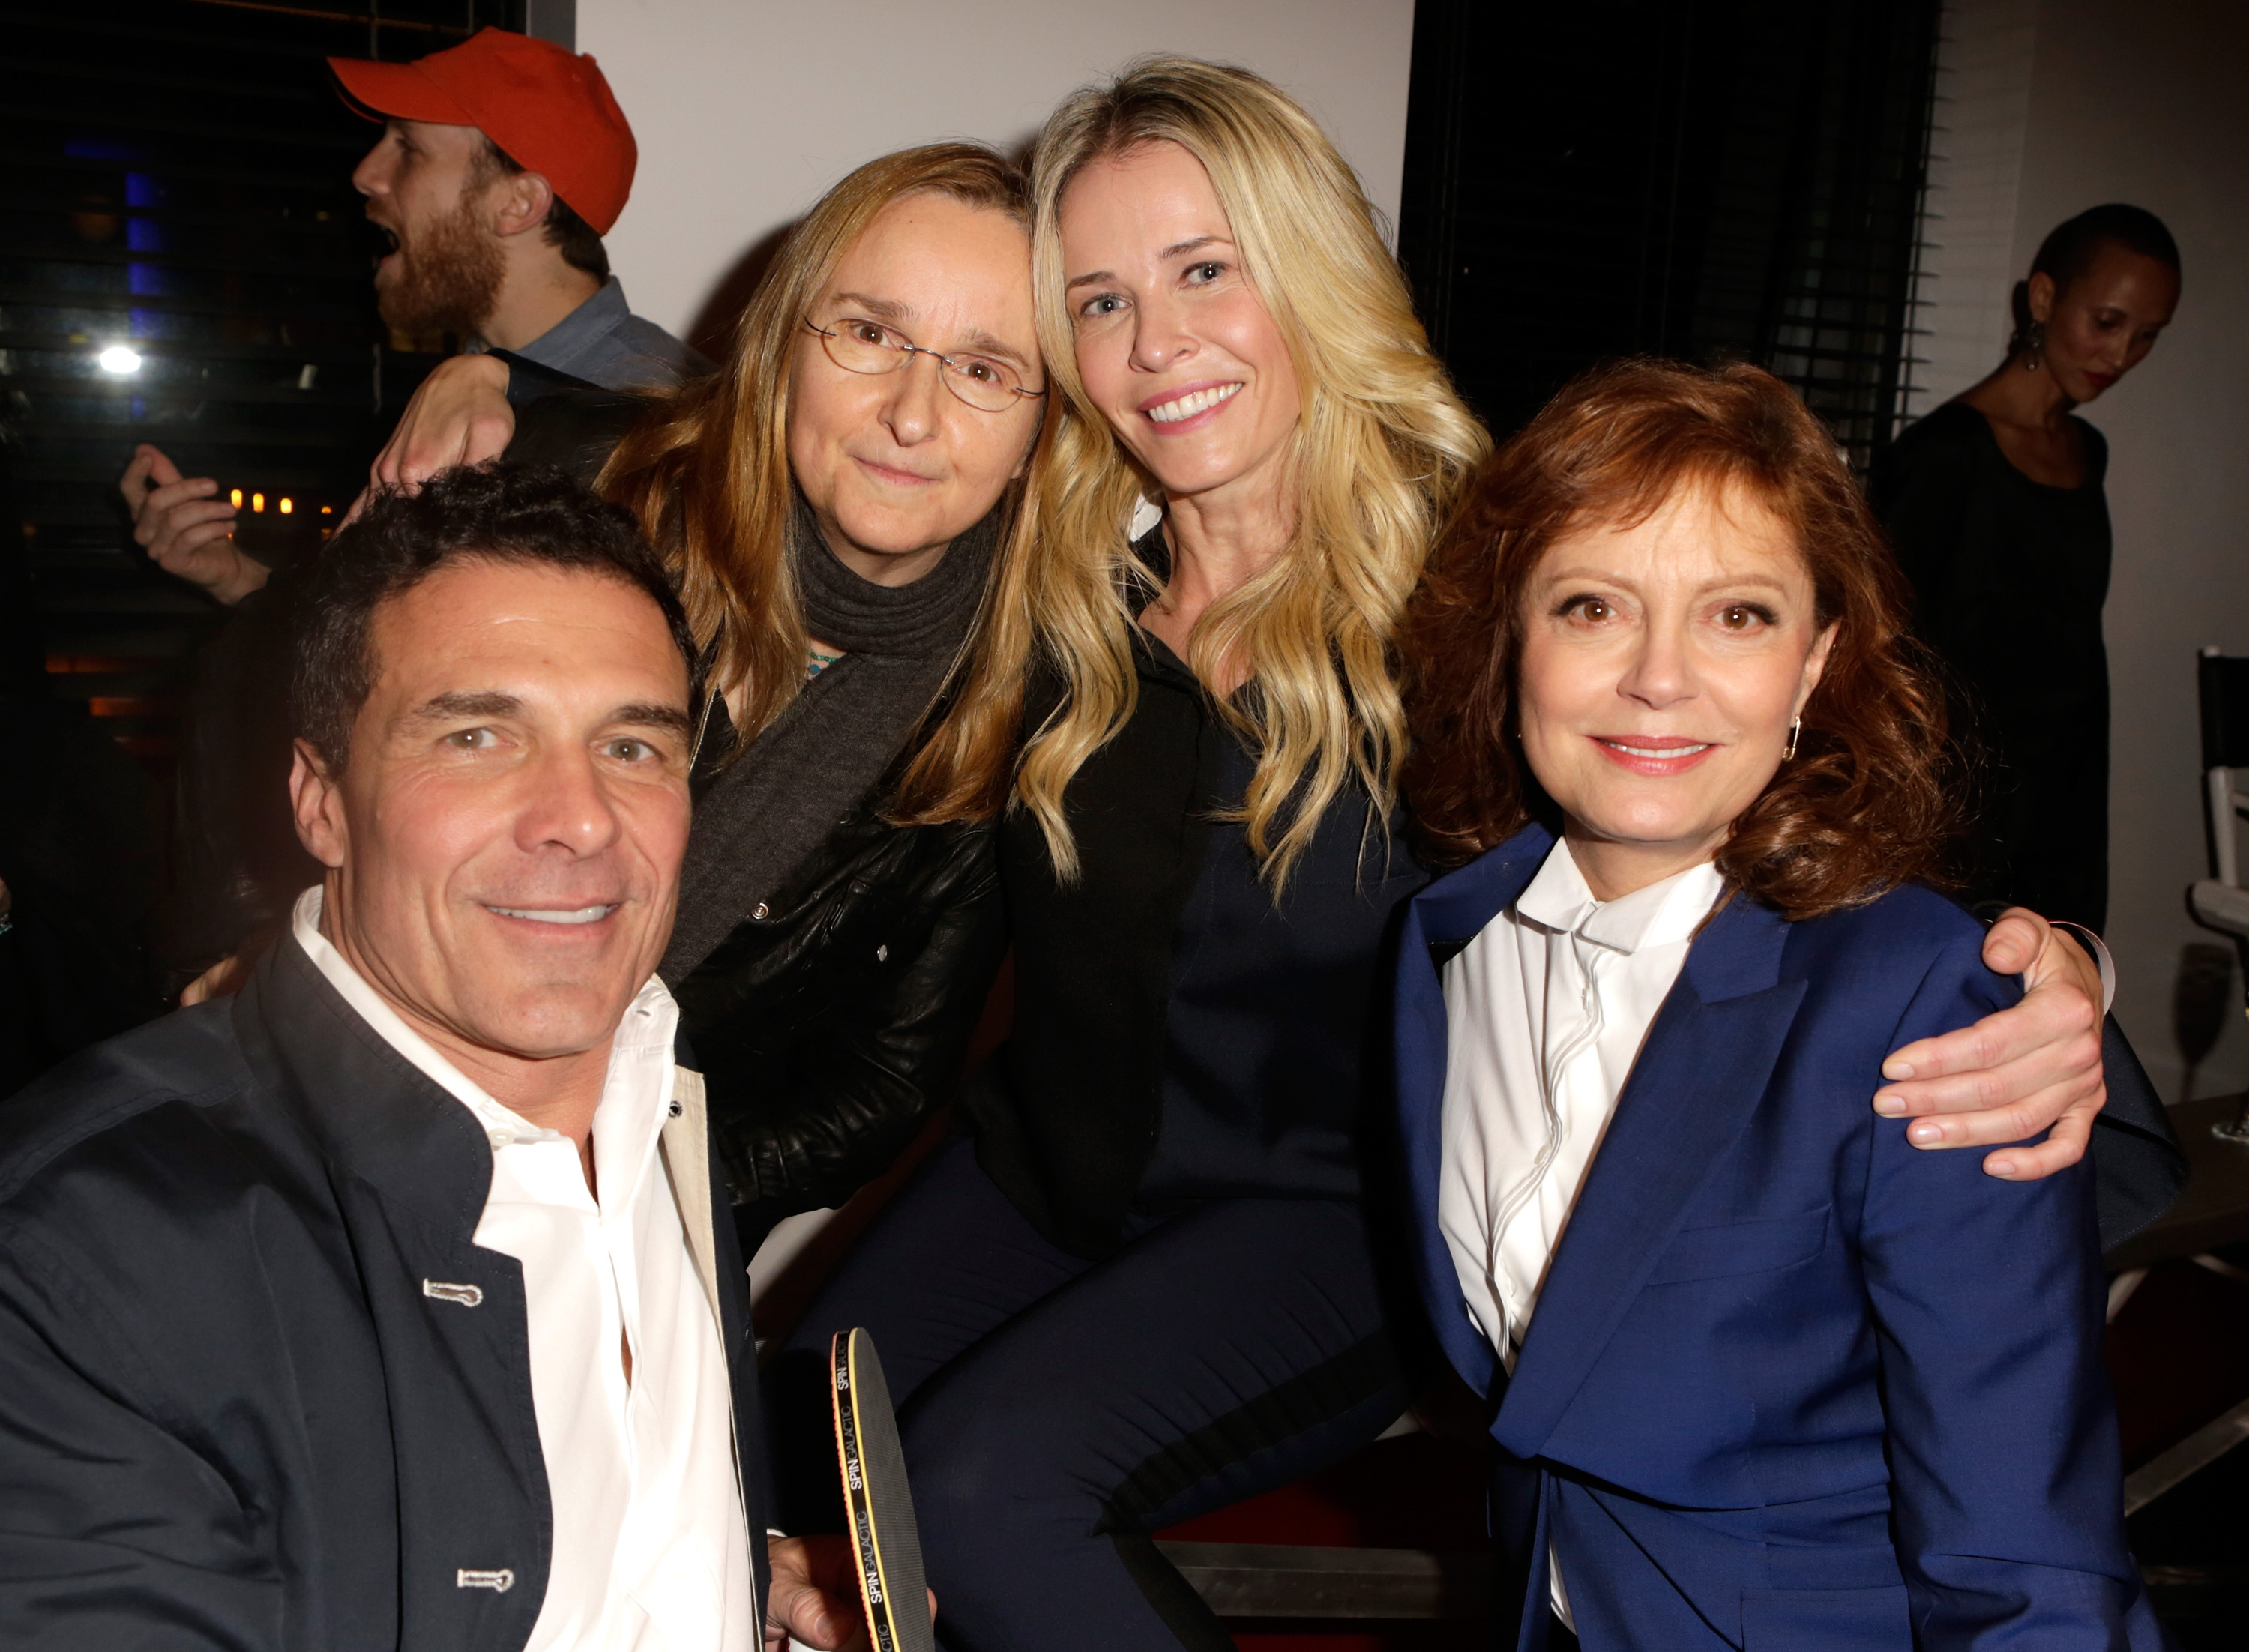 LOS ANGELES, CA - DECEMBER 11:  (L-R) Andre Balazs, musician Melissa Etheridge, TV personality Chelsea Handler (L) and actress Susan Sarandon attend SPiN Standard Ping Pong Social Club grand opening hosted by Susan Sarandon and Andre Balazs at The Standard, Downtown LA, on December 11, 2012 in Los Angeles, California.  (Photo by Jeff Vespa/WireImage)